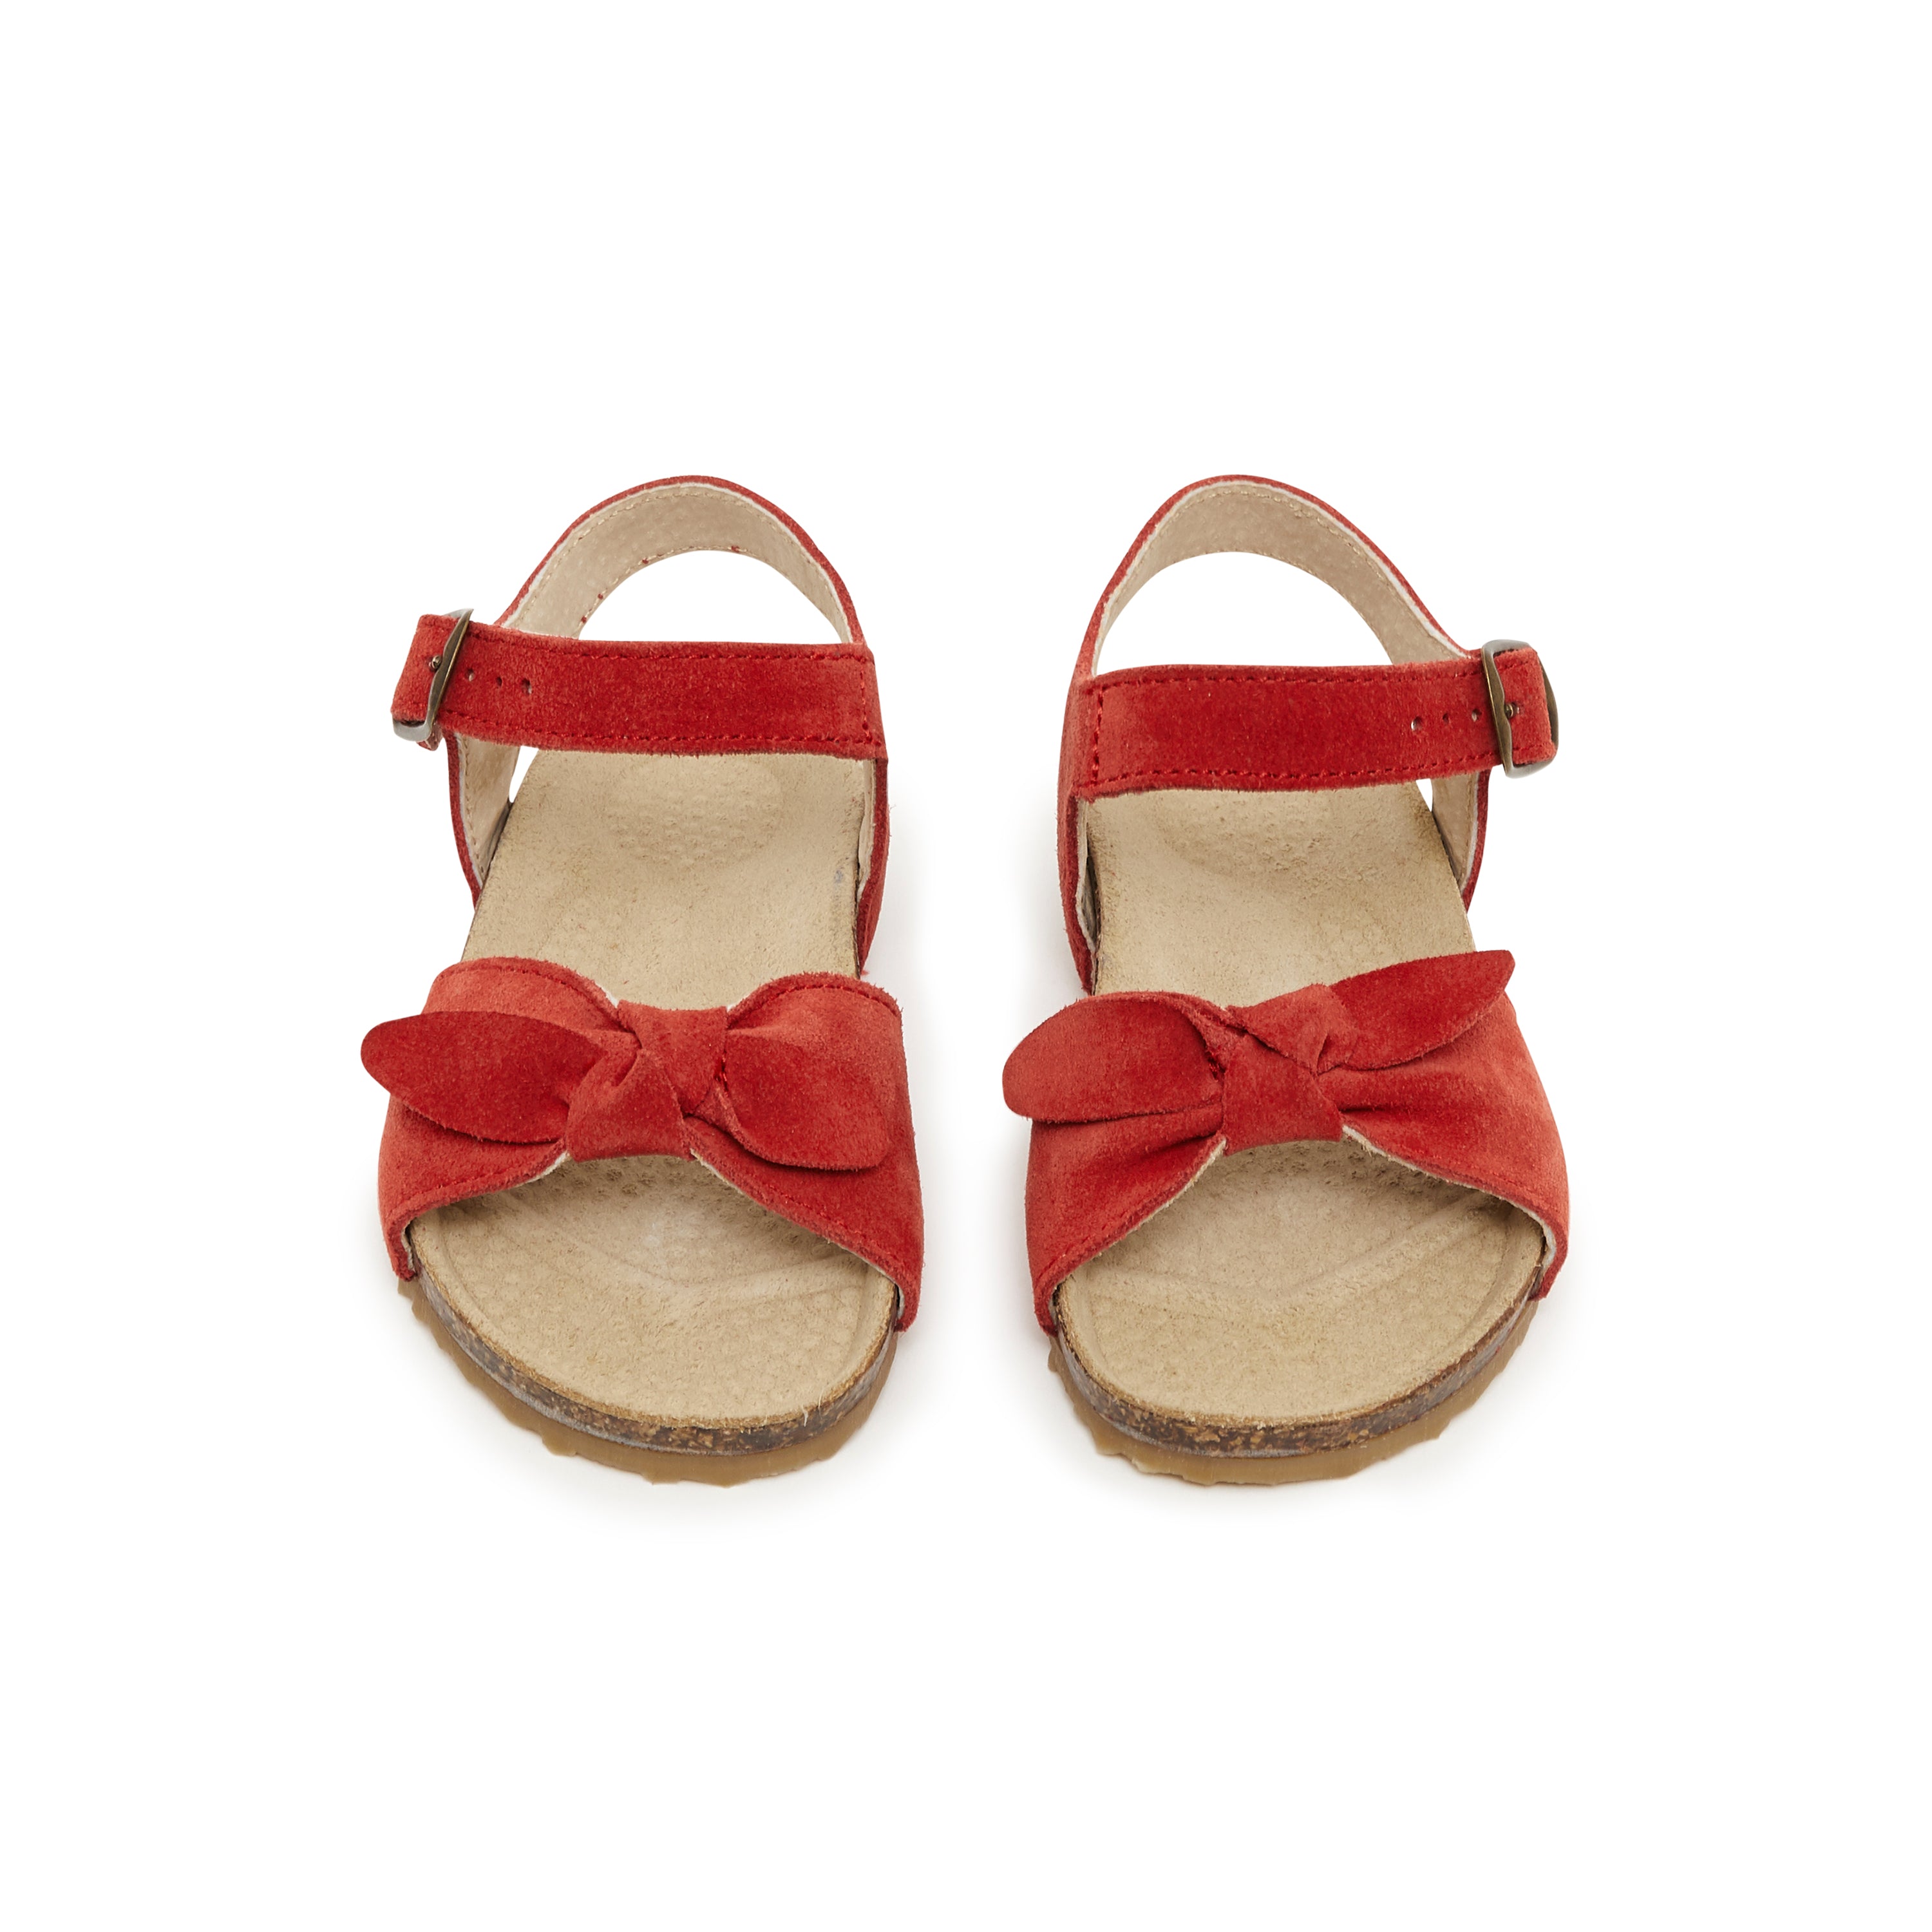 Girls Red Bow Leather Sandals